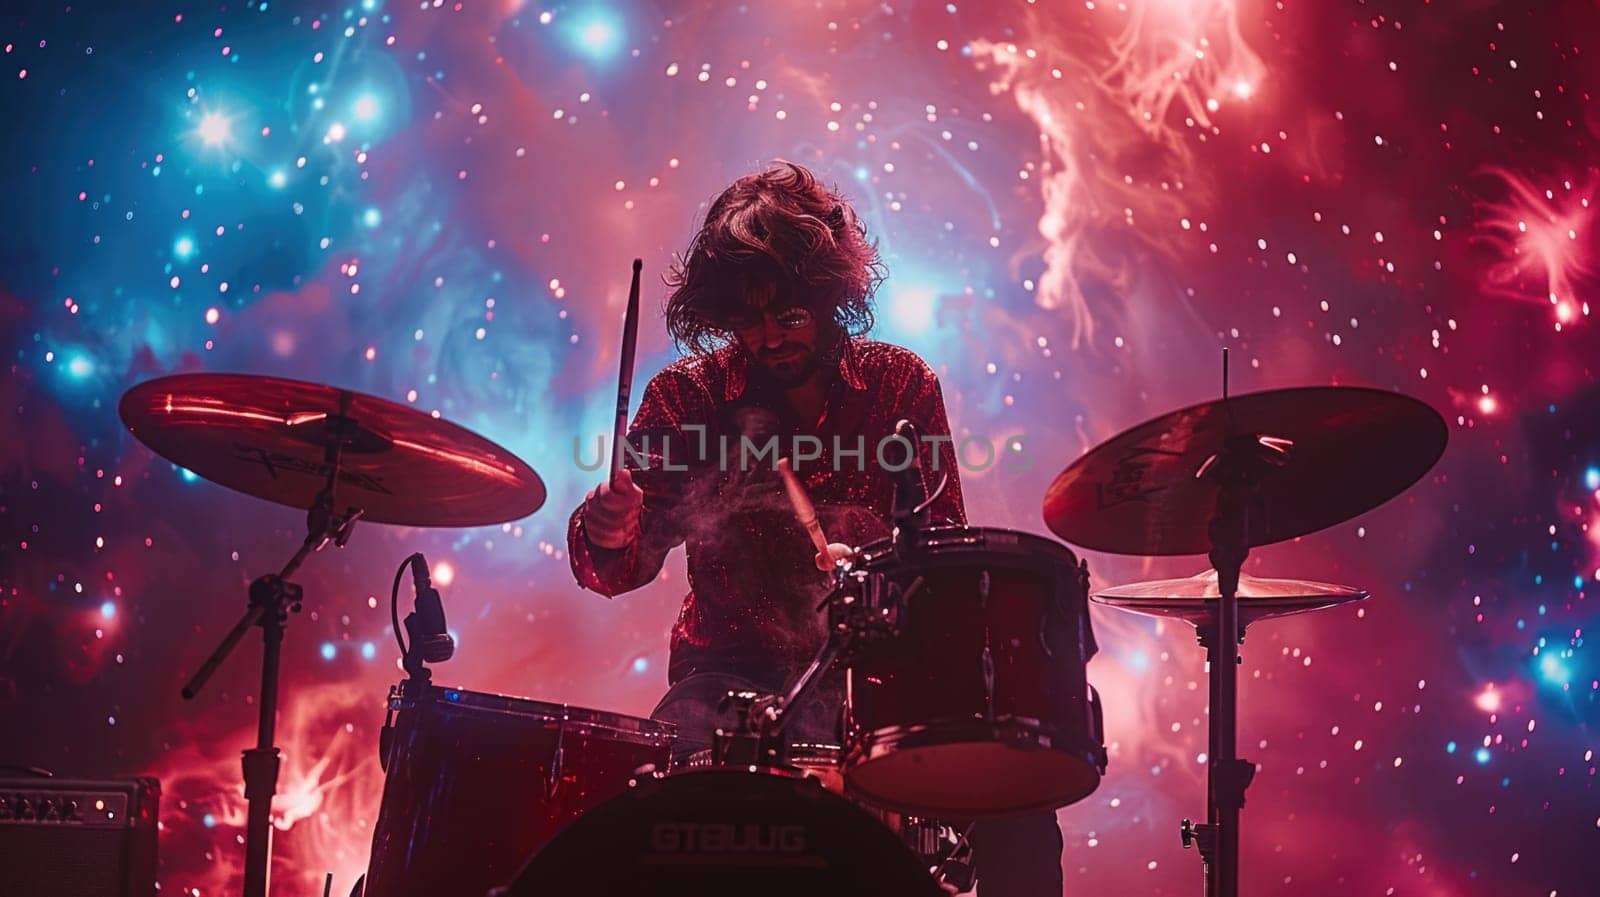 A man playing drums in front of a vibrant, colorful backdrop.